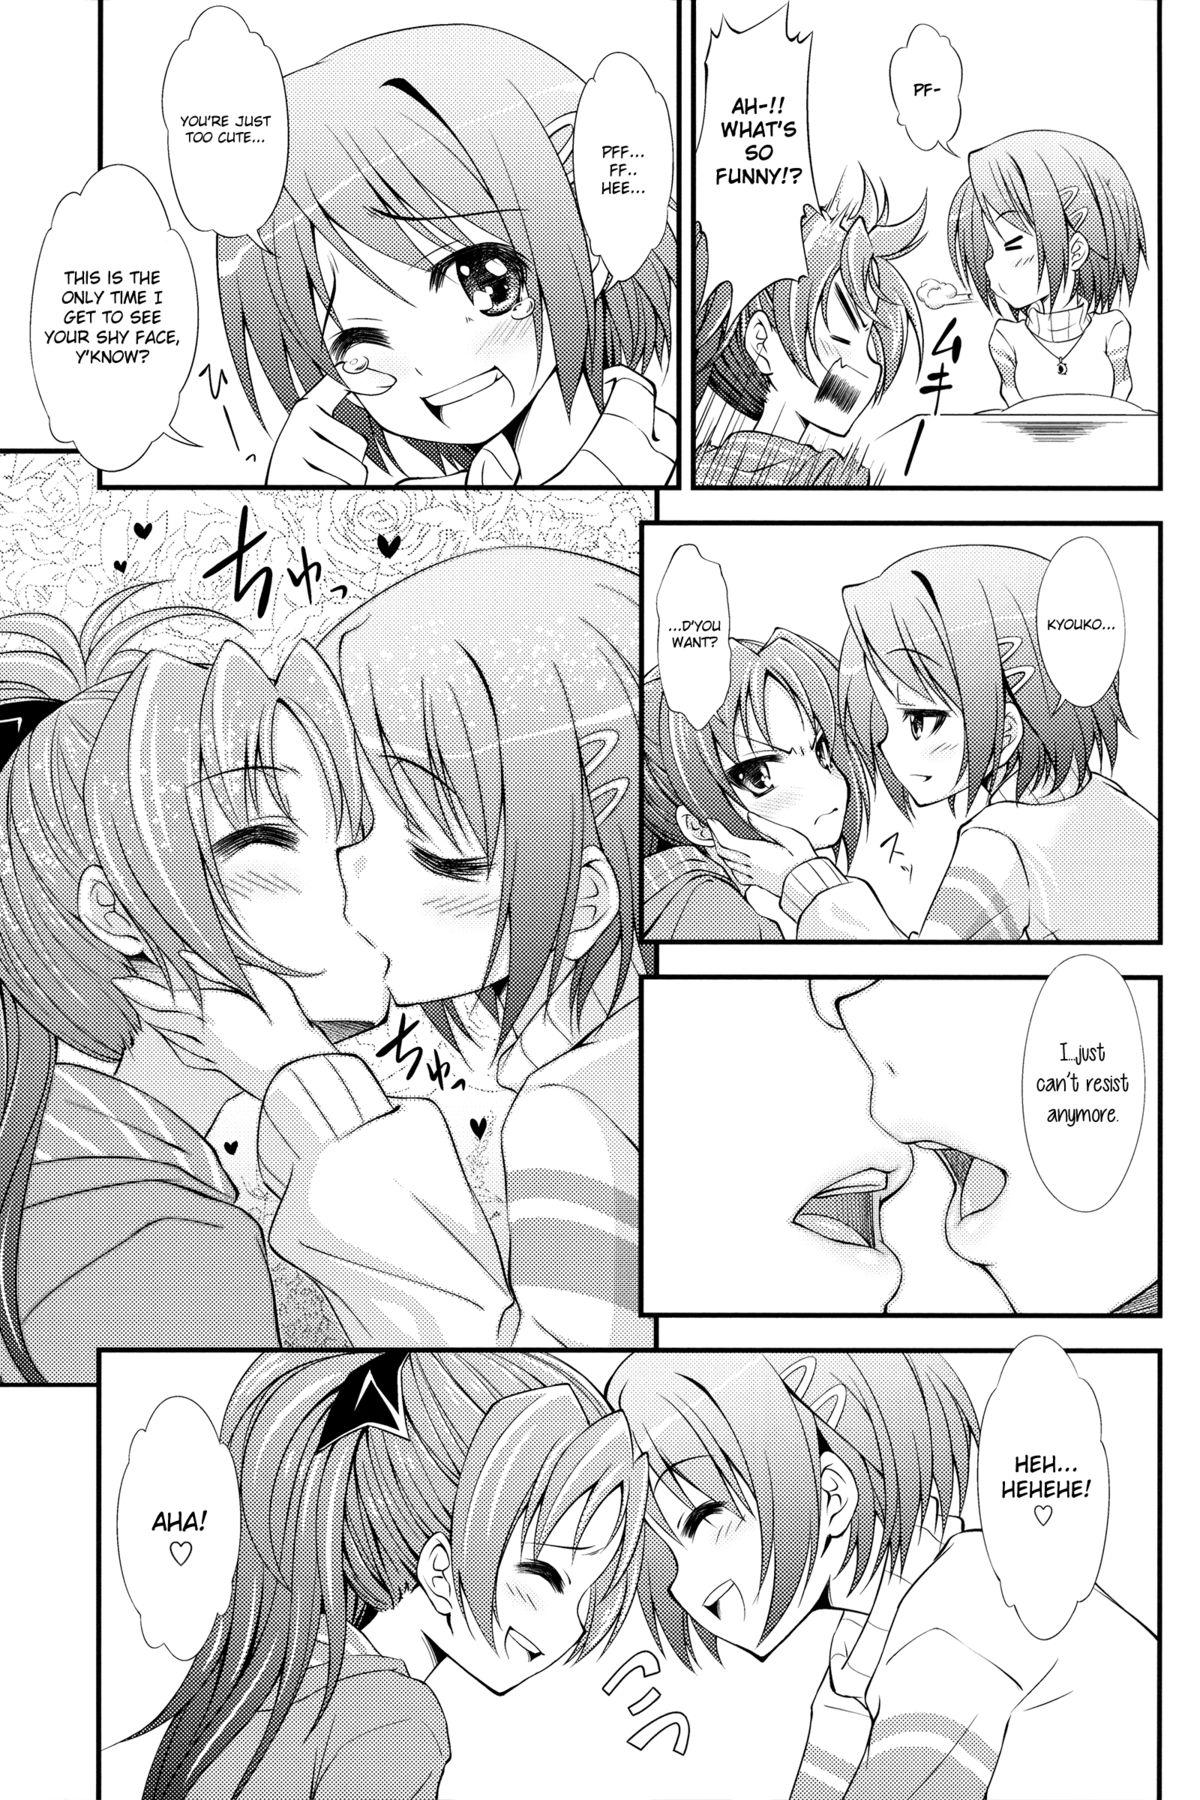 Porn Pussy Lovely Girls' Lily vol.3 - Puella magi madoka magica Deflowered - Page 12